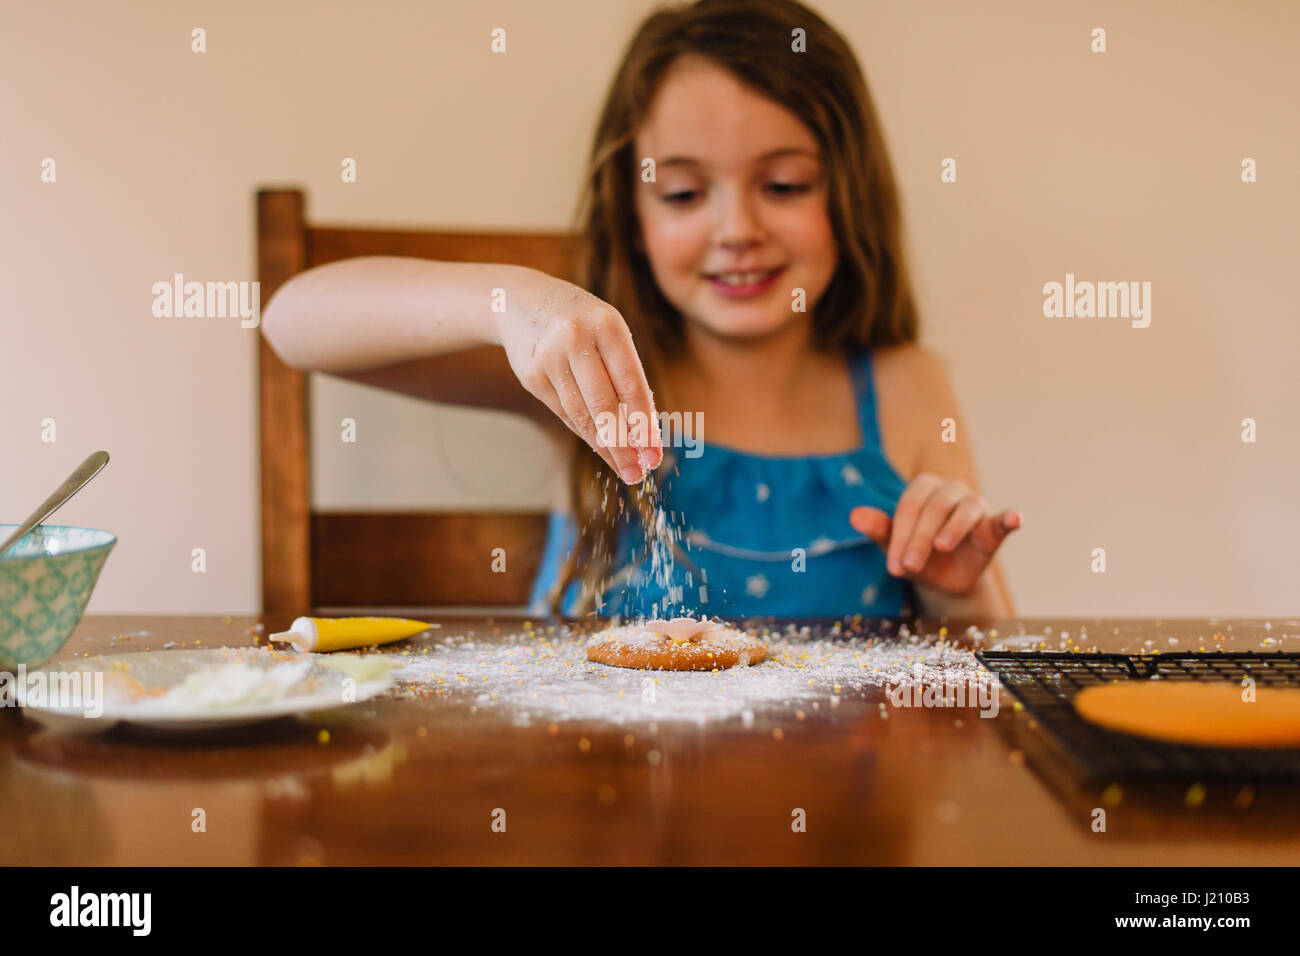 Girl decorating biscuits at home Stock Photo